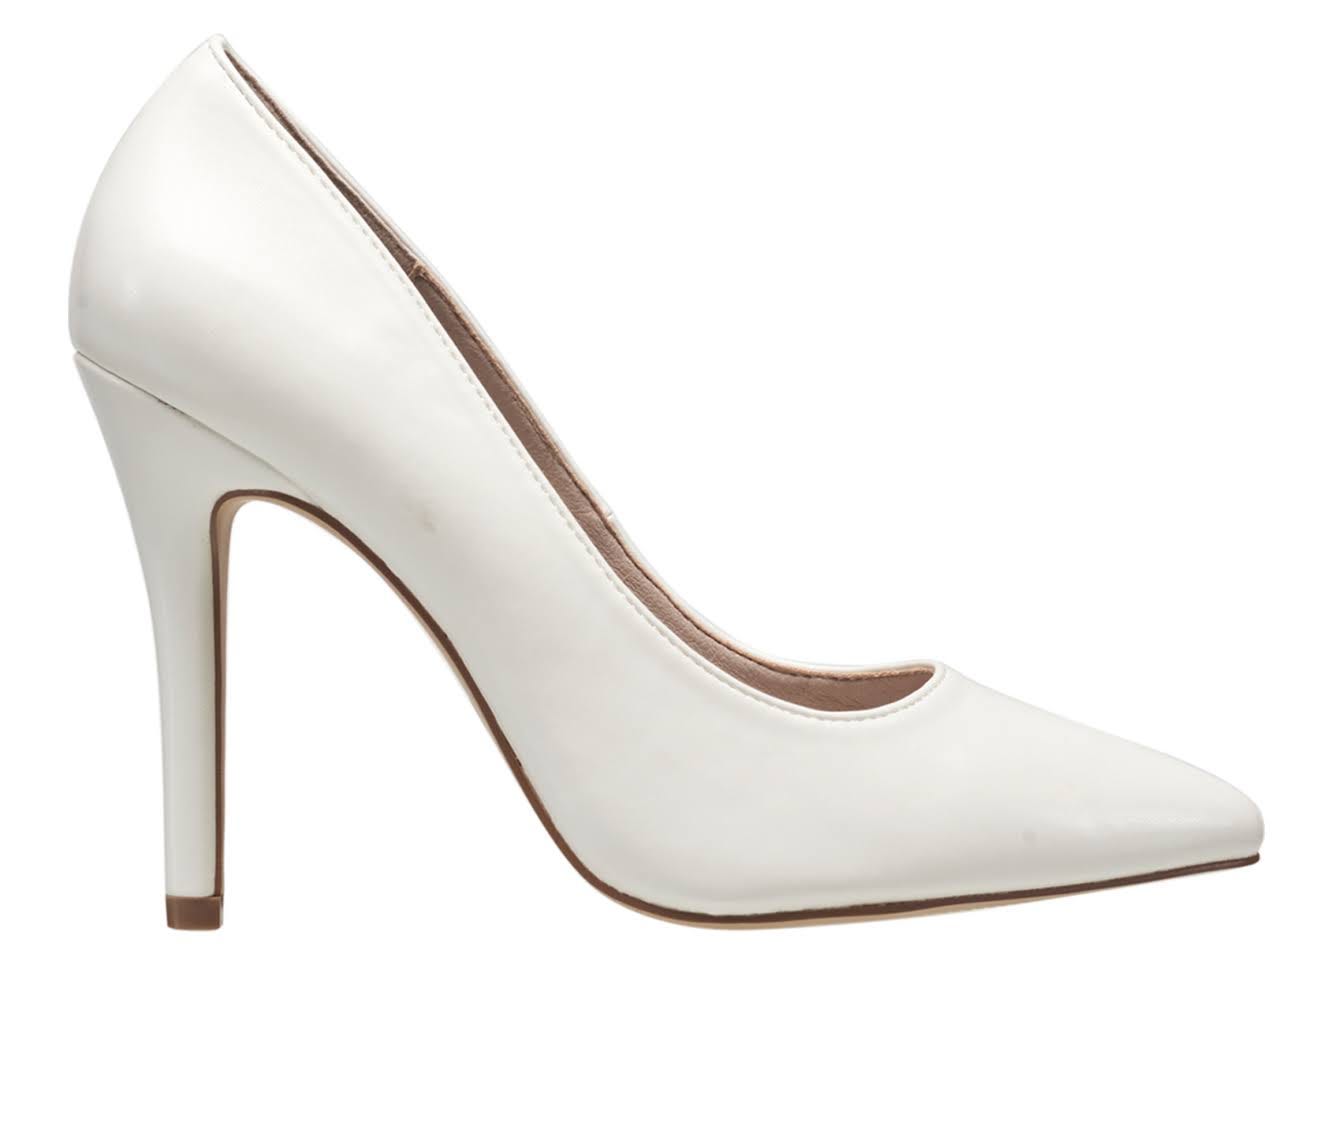 French Connection Women's White Sierra Pump Dress Shoes - Size 7.5M | Image